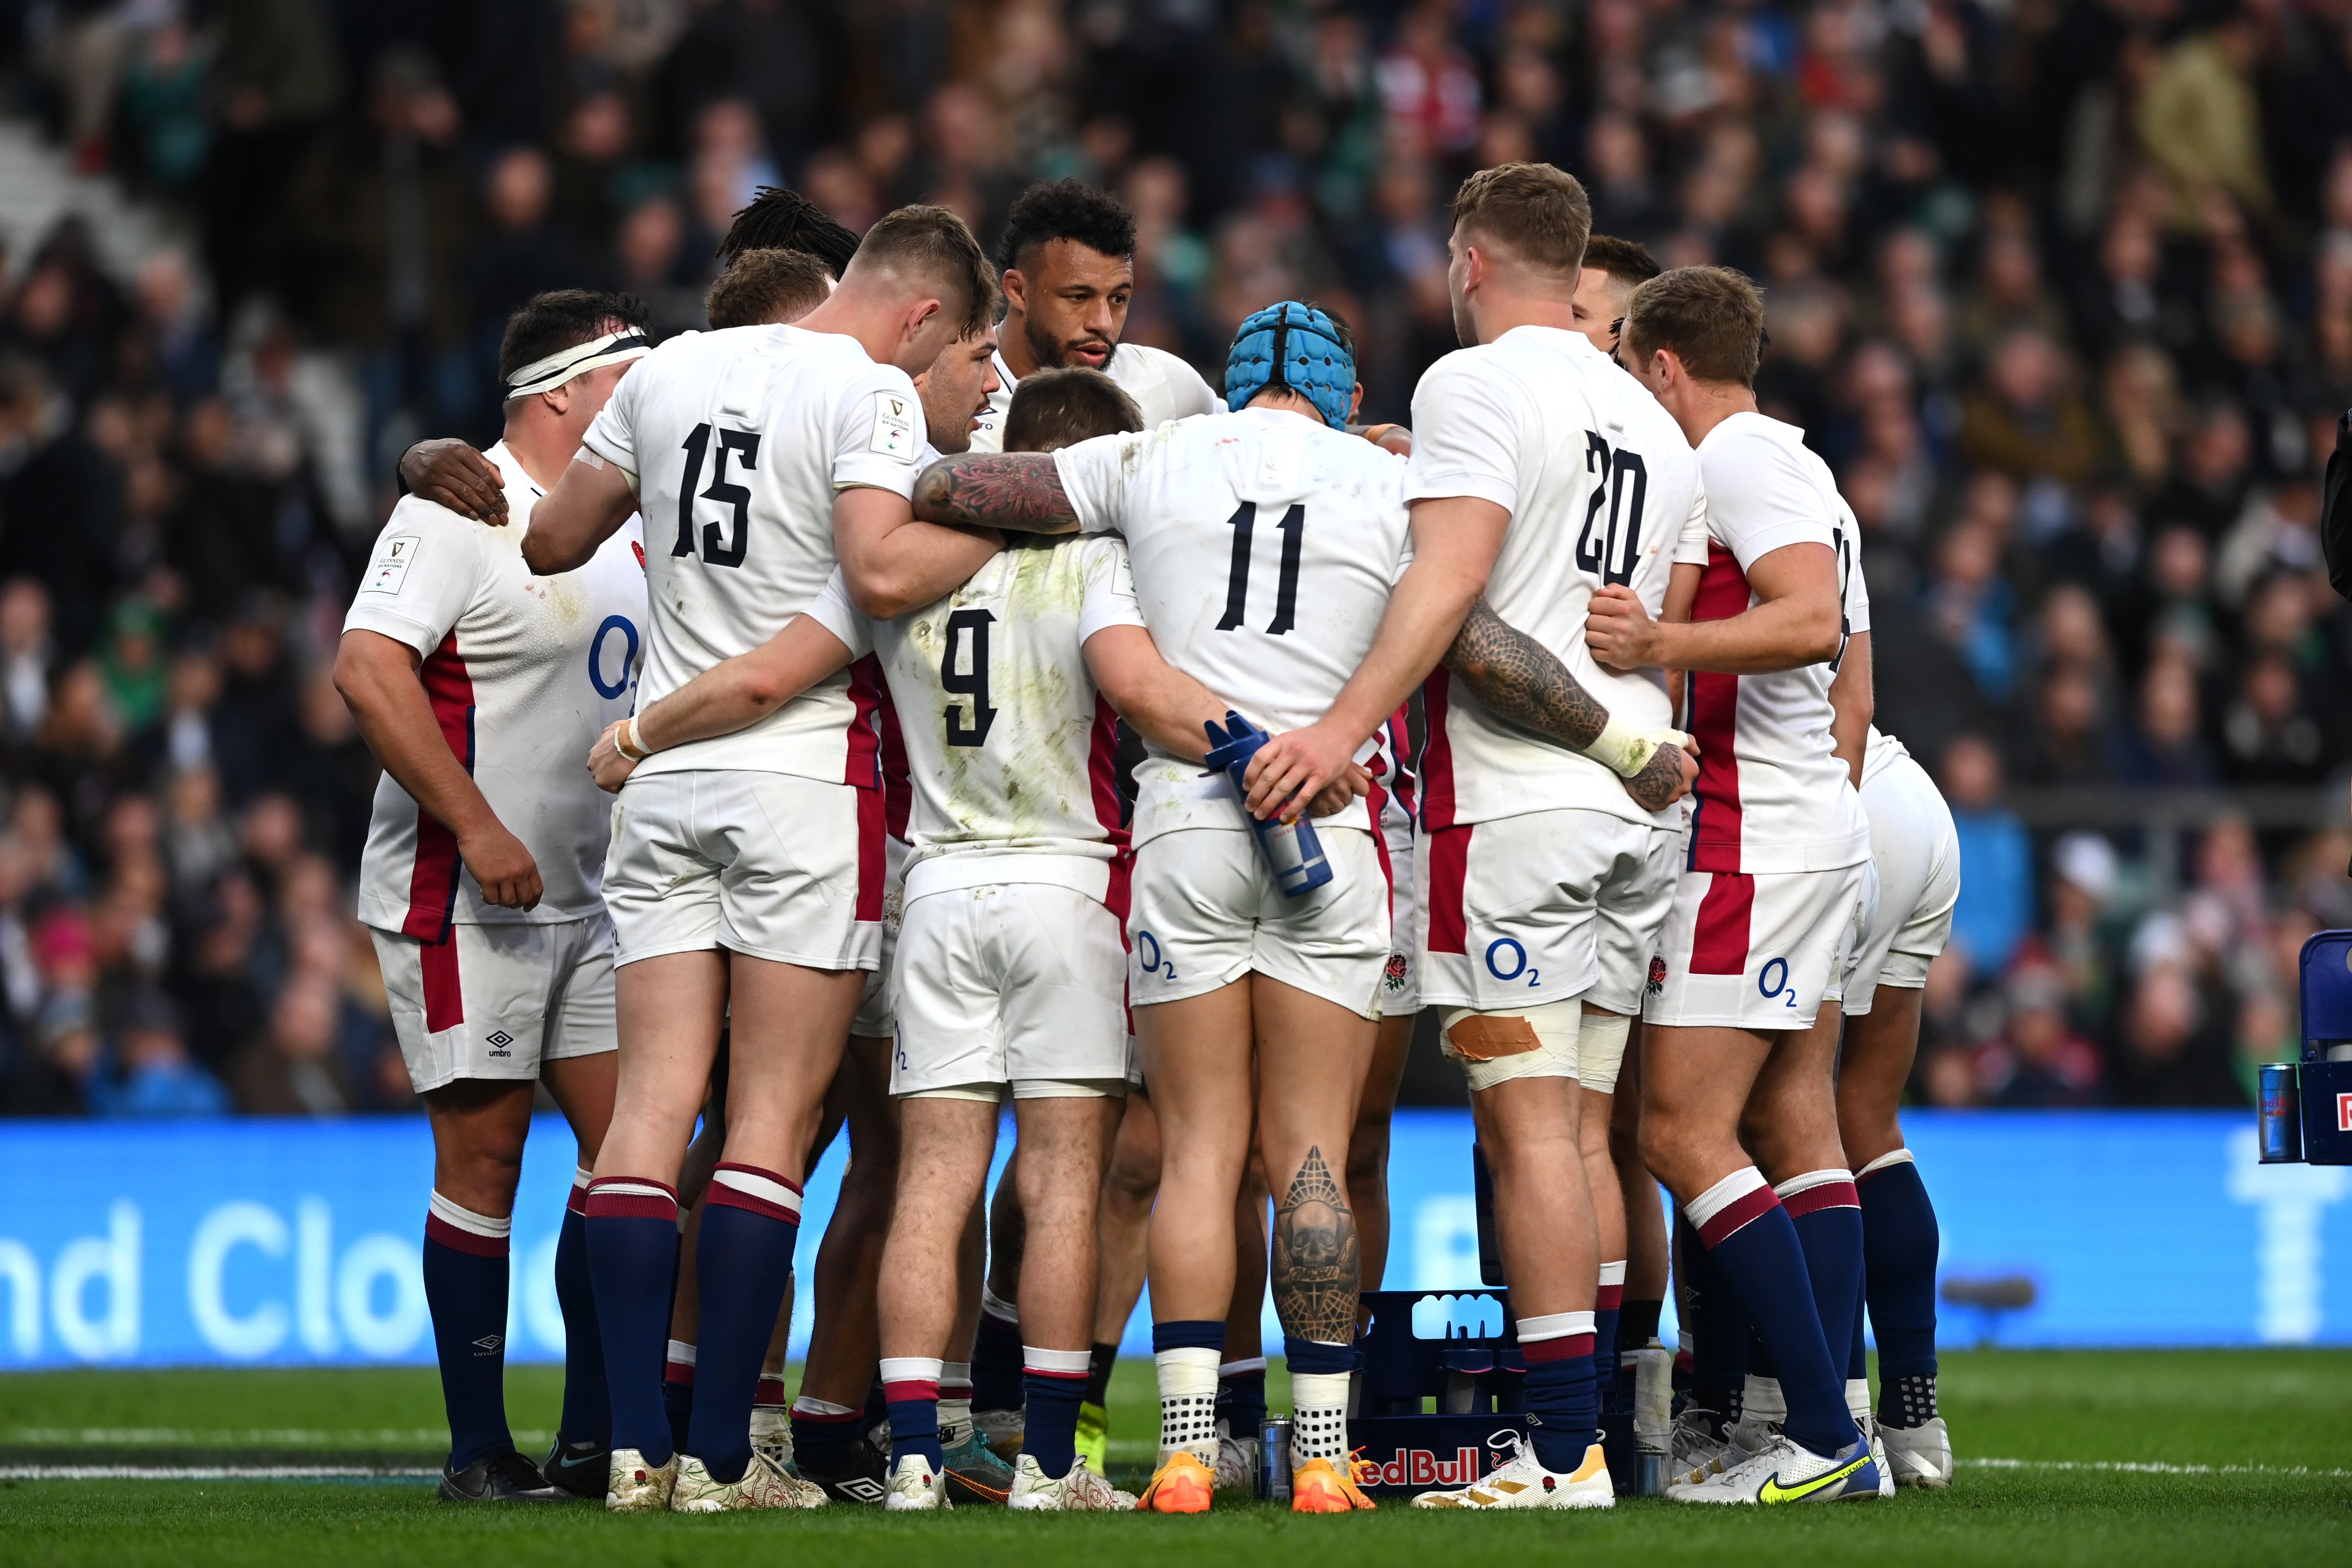 Eddie Jones’ side will meet Argentina, Japan, New Zealand and South Africa